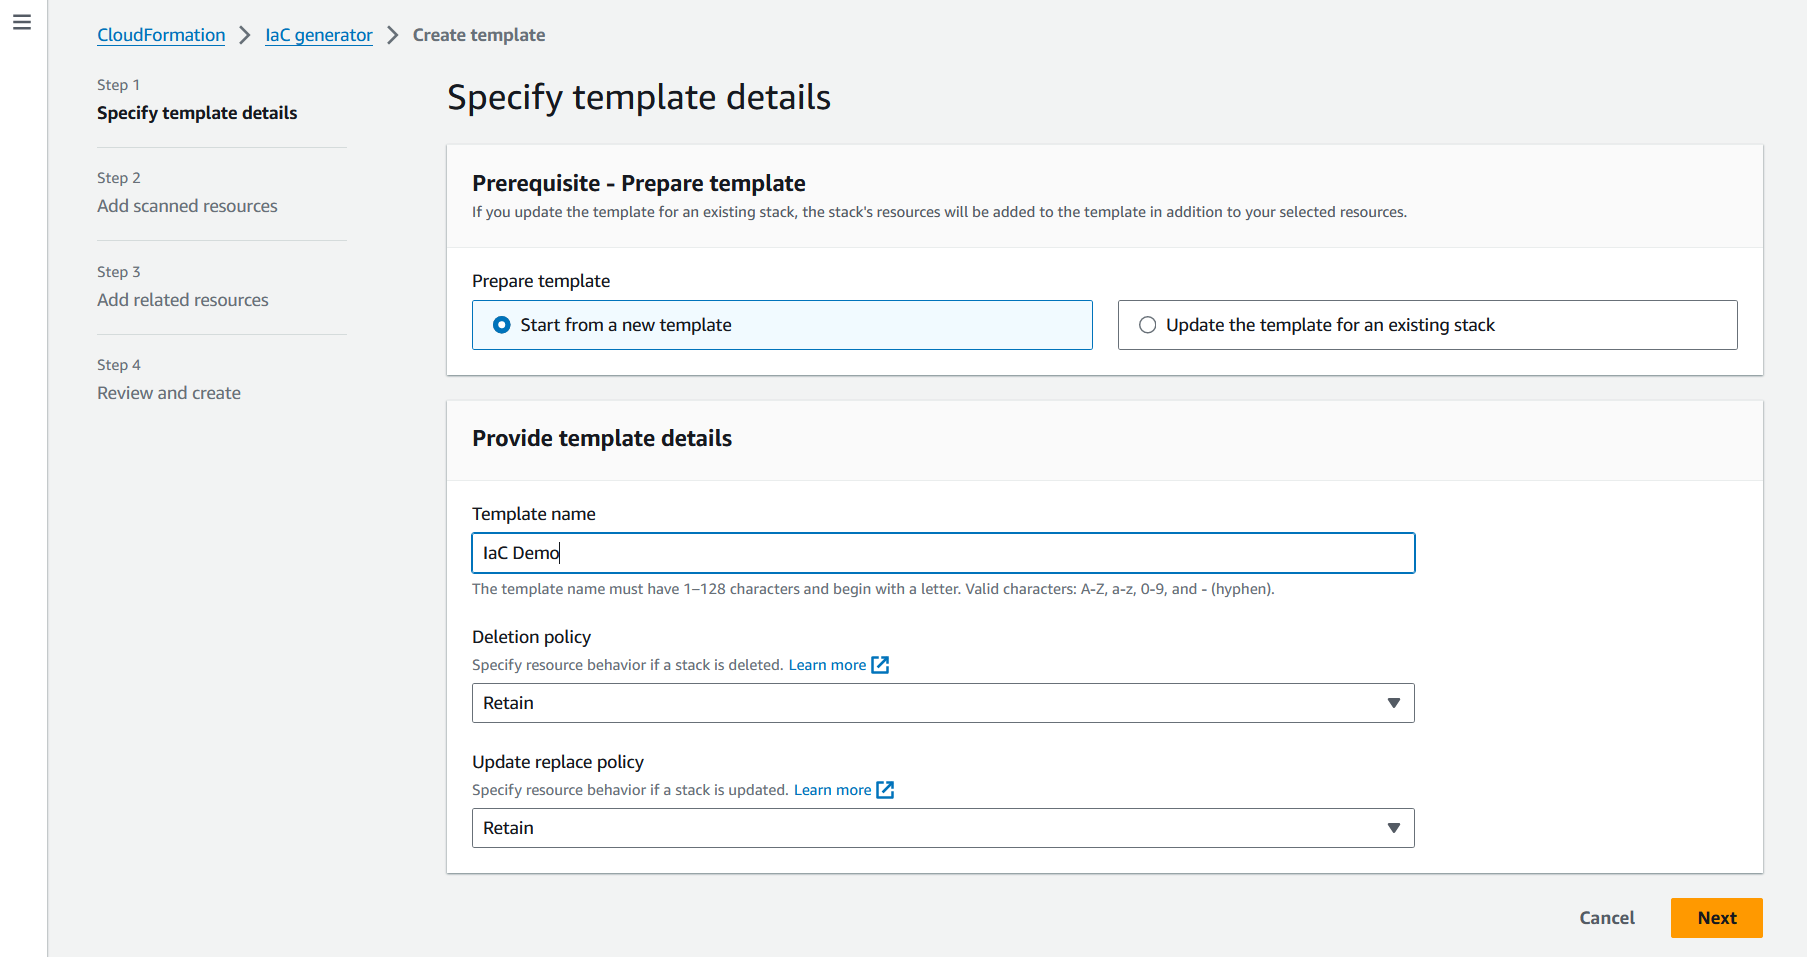 
      Specify template details page of IaC generator
     